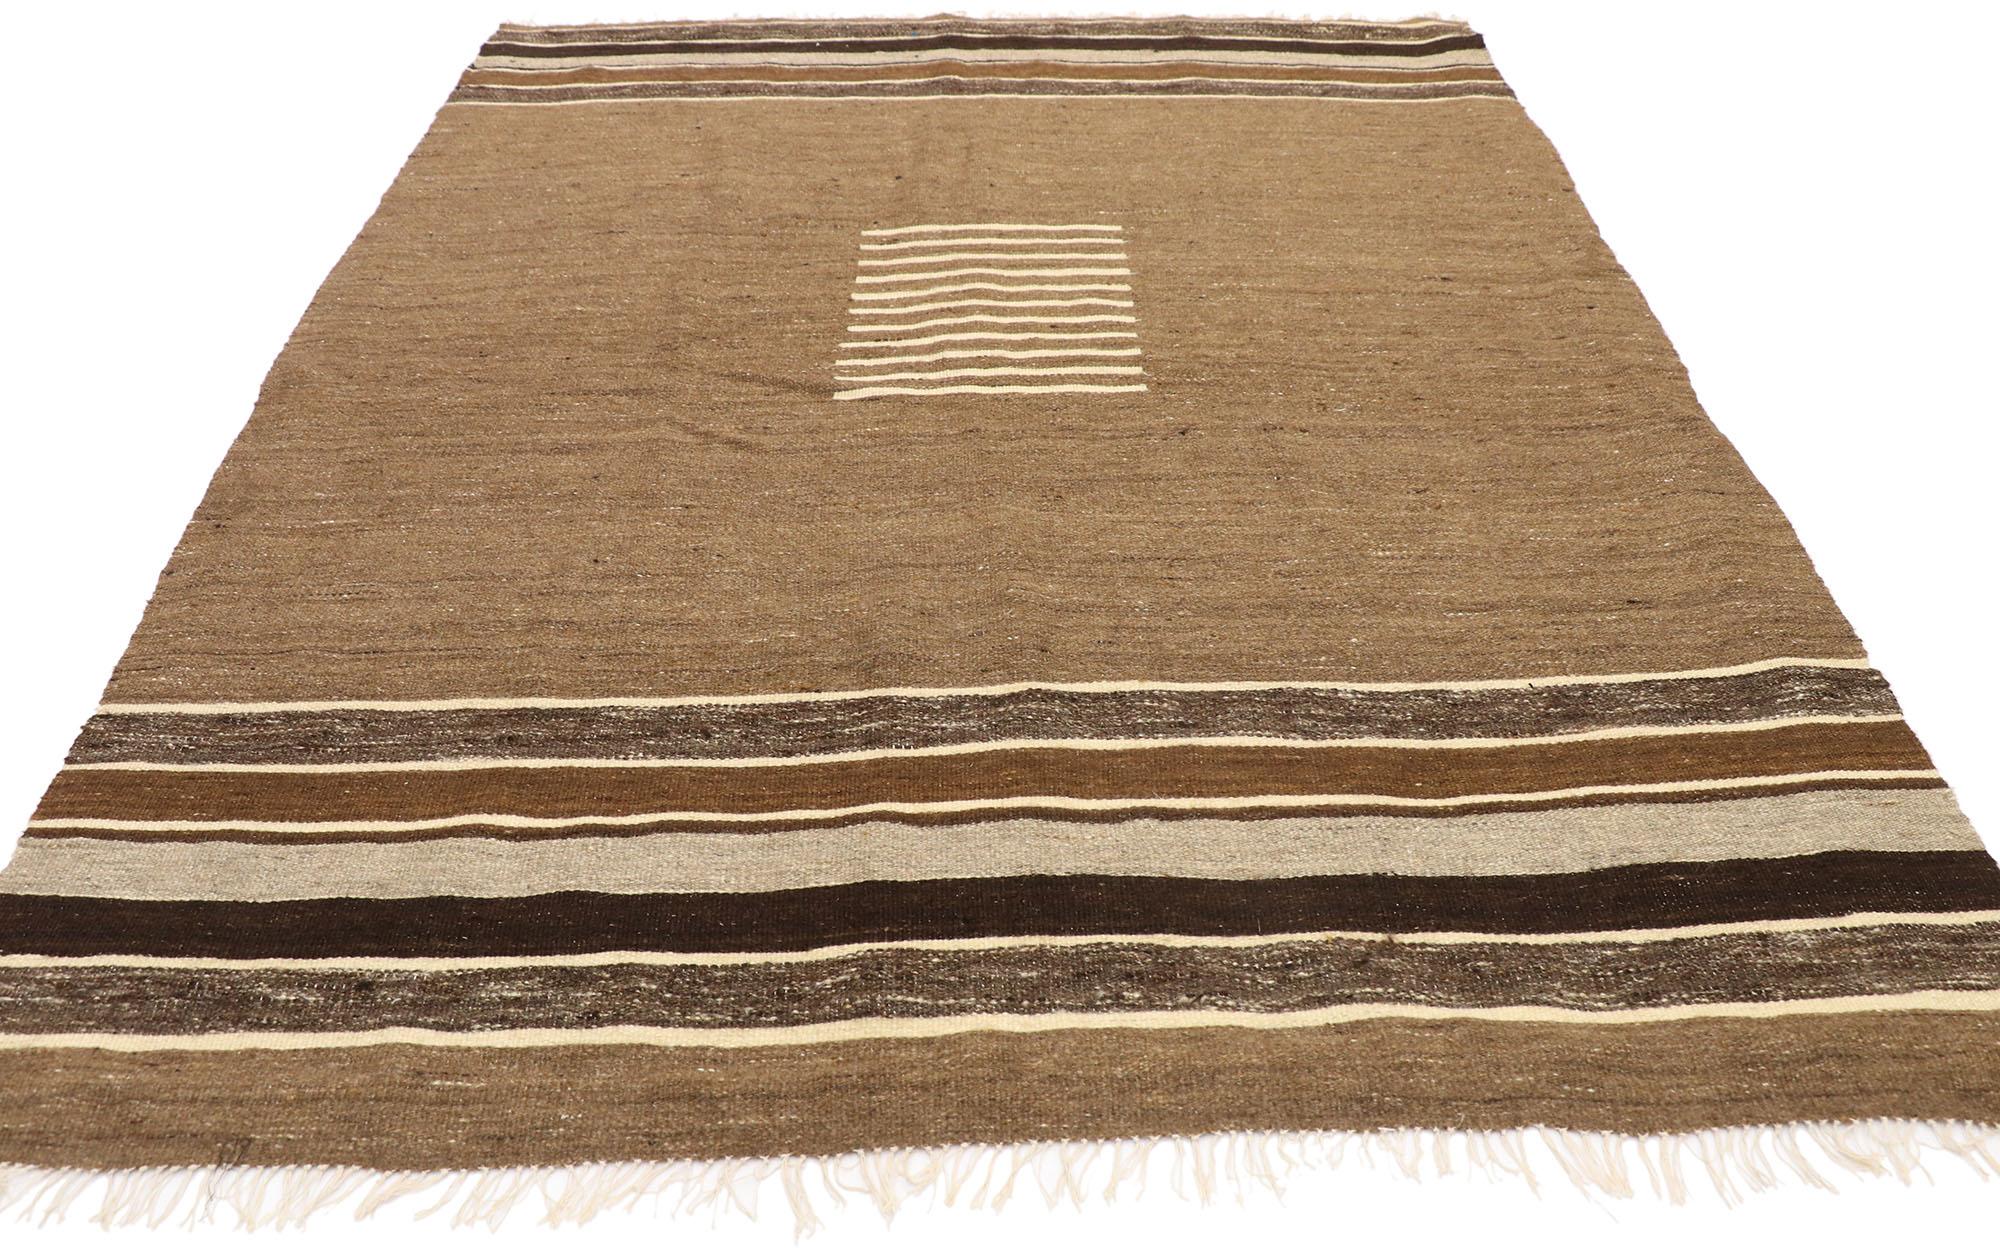 Hand-Woven Vintage Turkish Kilim Rug with Mid-Century Modern Style, Square Flat-Weave Rug